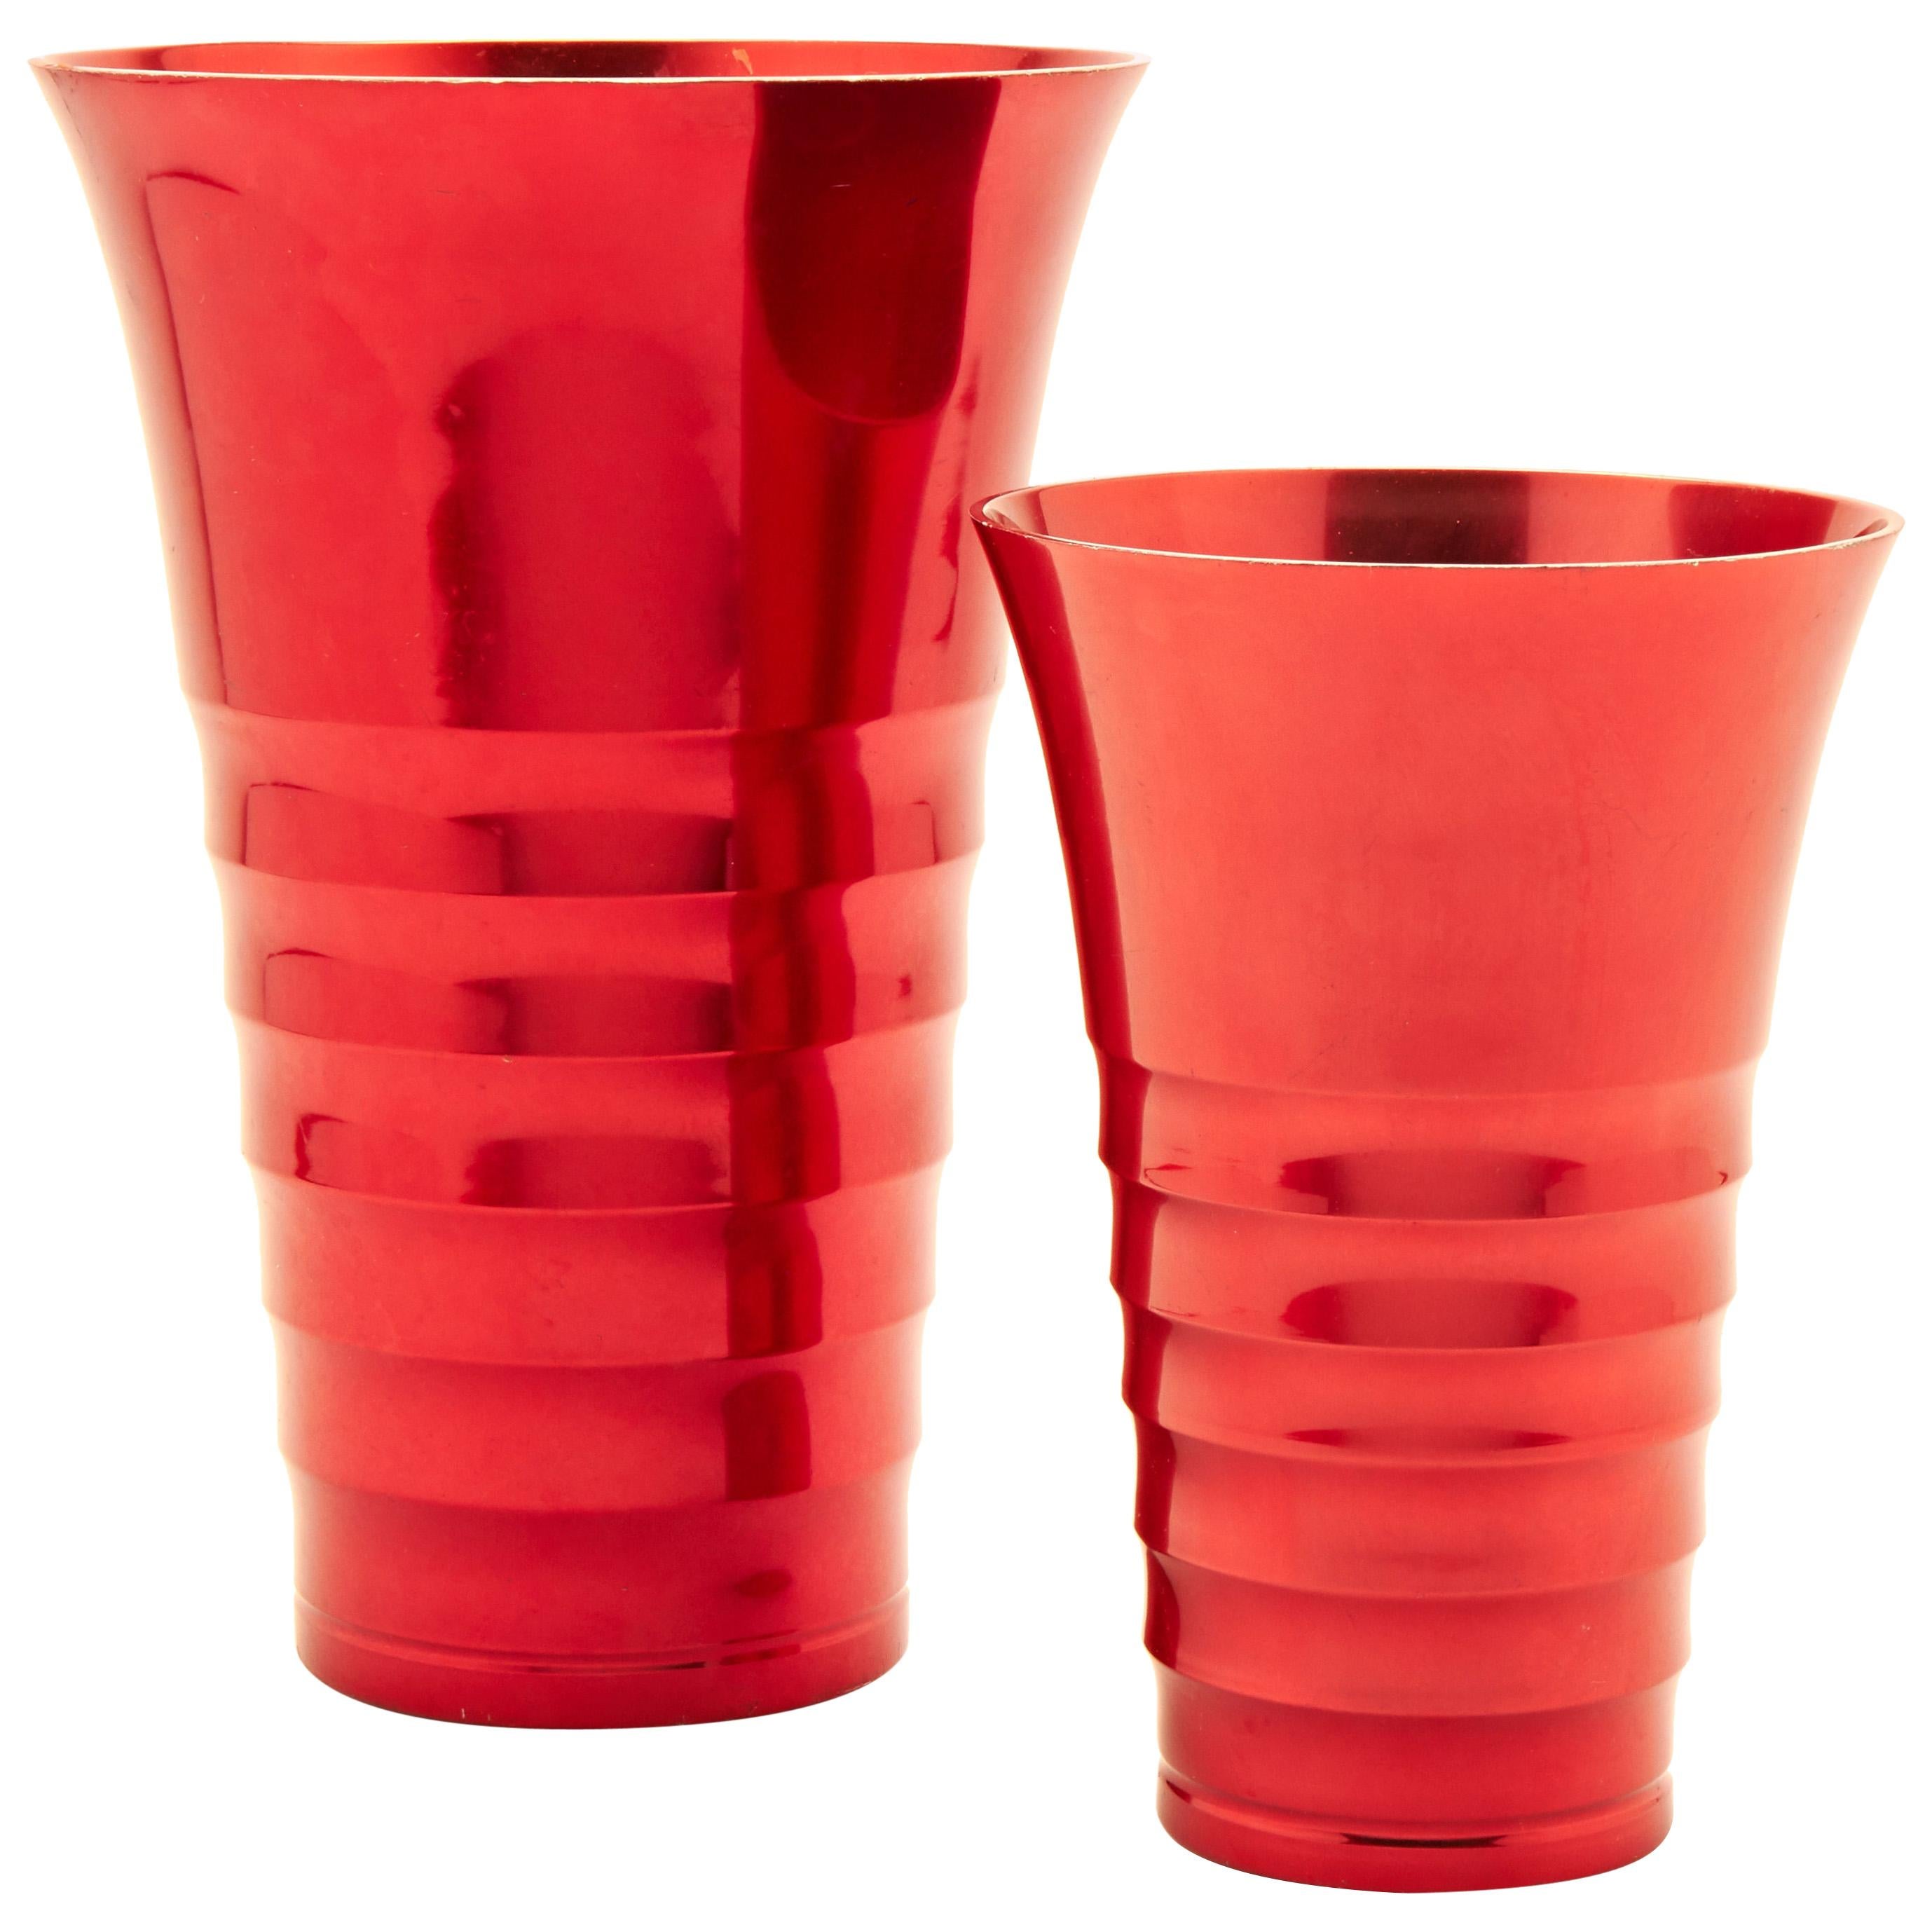 Set of 2 English Midcentury Rare Red Anodized Aluminum Ribbed Vases by Kaymet  For Sale